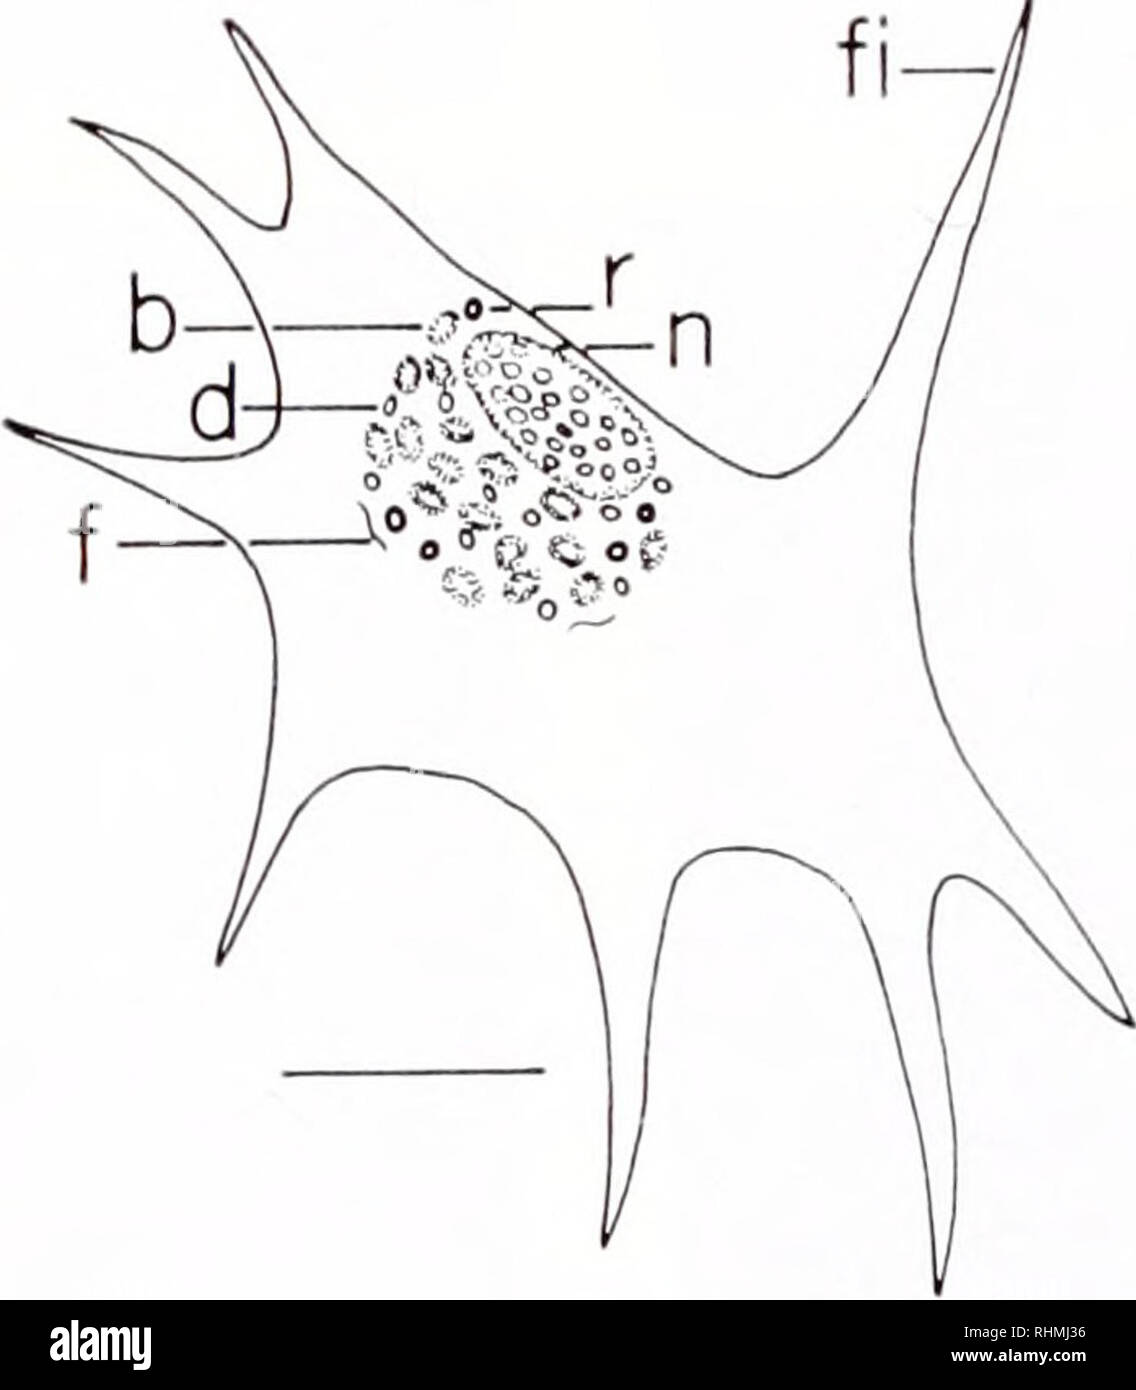 . The Biological bulletin. Biology; Zoology; Biology; Marine Biology. FIGURE 1. Diagram of a &quot;typical&quot; agranulocyte of Mcrccnaria mcrccnaria. Note the tliin rim of cytoplasm surrounding the nucleus and few cytoplasmic granules: c, cytoplasm; n, nucleus; g, granule; 10 nm bar. FIGURE 2. Diagram of a &quot;typical&quot; small granulocyte demonstrating four granule types confined to the endoplasm; h, blunt granule; d, dot-like granule; f, filamentous granule; n, nucleus; p, pseudopod; r, refractile granule; 9 /mi bar. The detection of both lipicls and phospholipids employed hemocytes fi Stock Photo